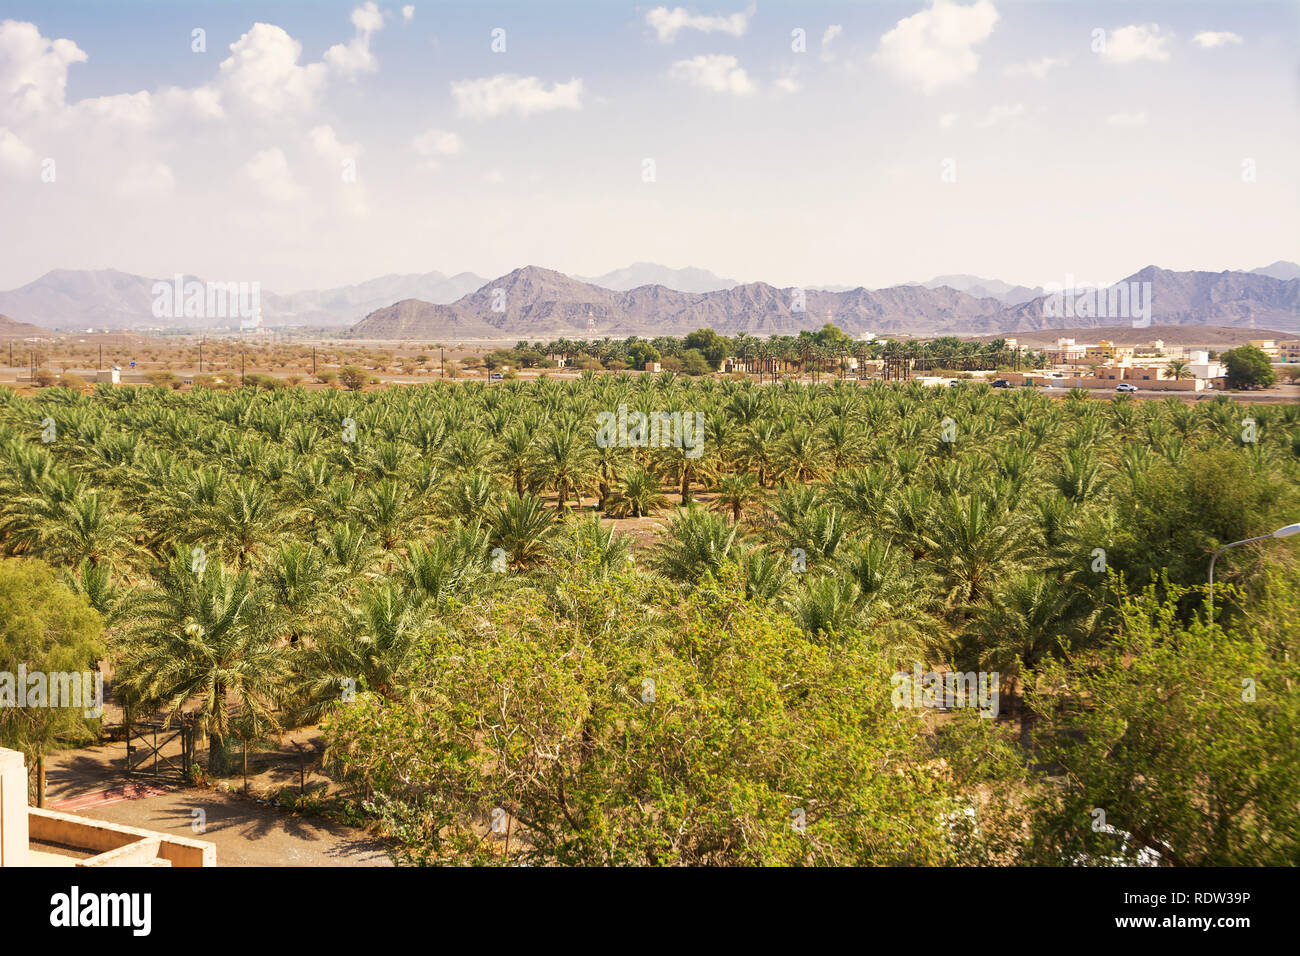 Cultivation of date trees in Oman Stock Photo